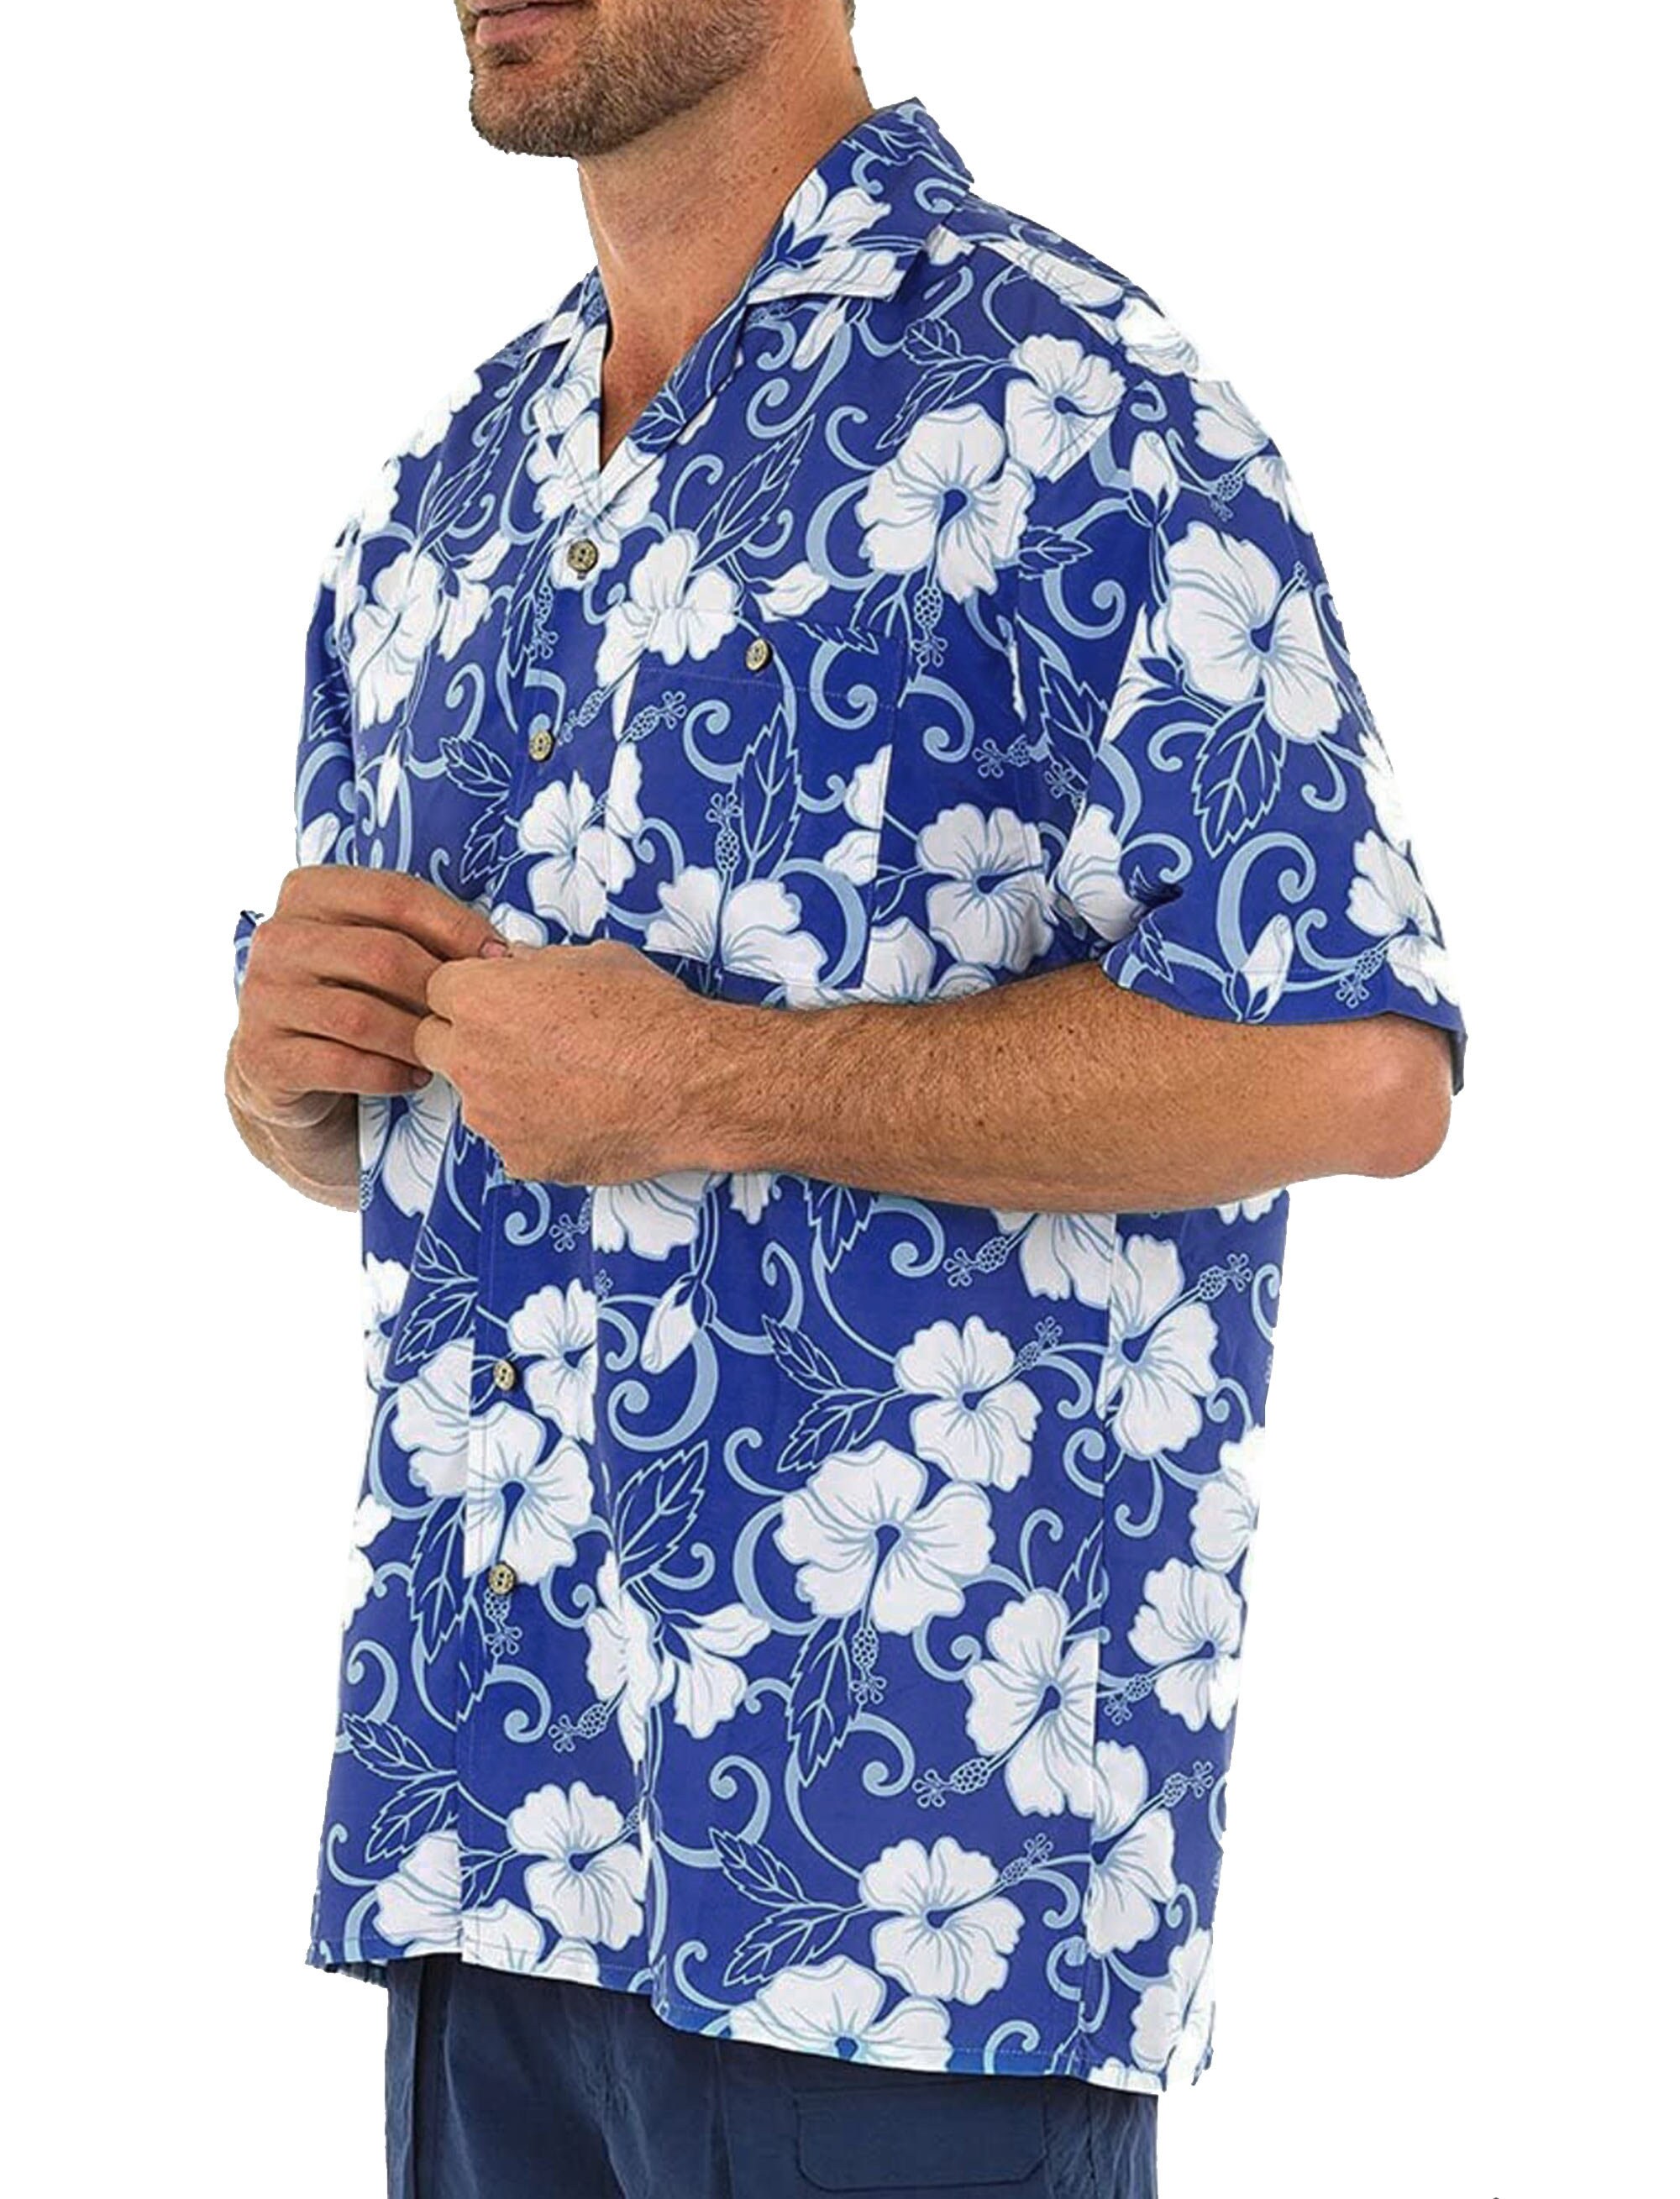 Discover Blue Button Down Hawaiian Shirt with Hibiscus Flower Print